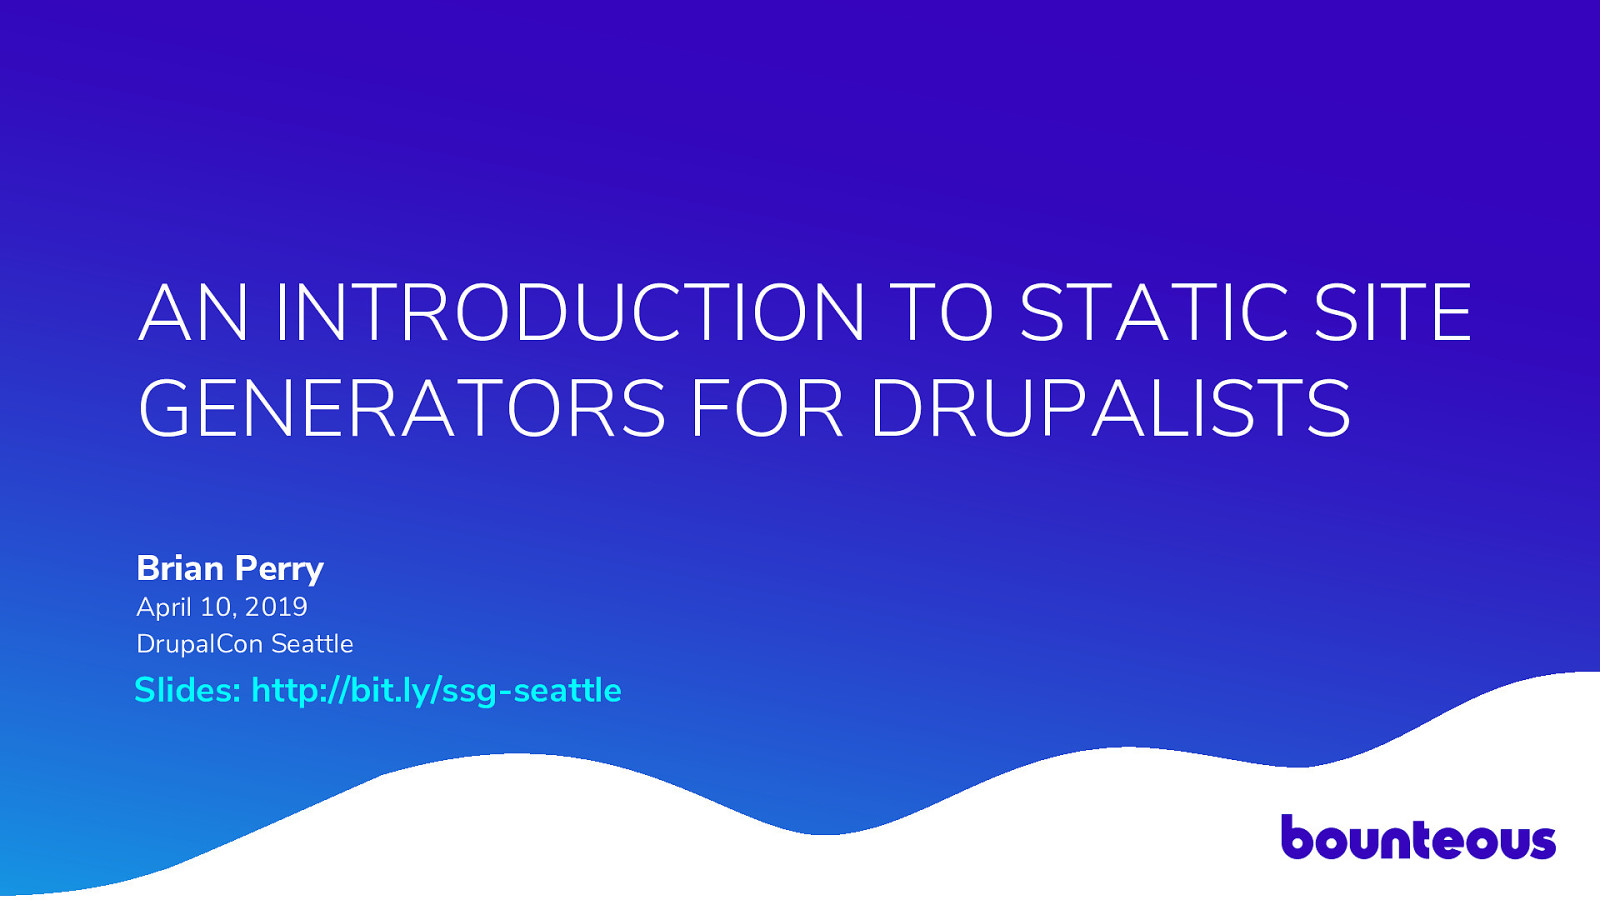 An Introduction to Static Site Generators for Drupalists